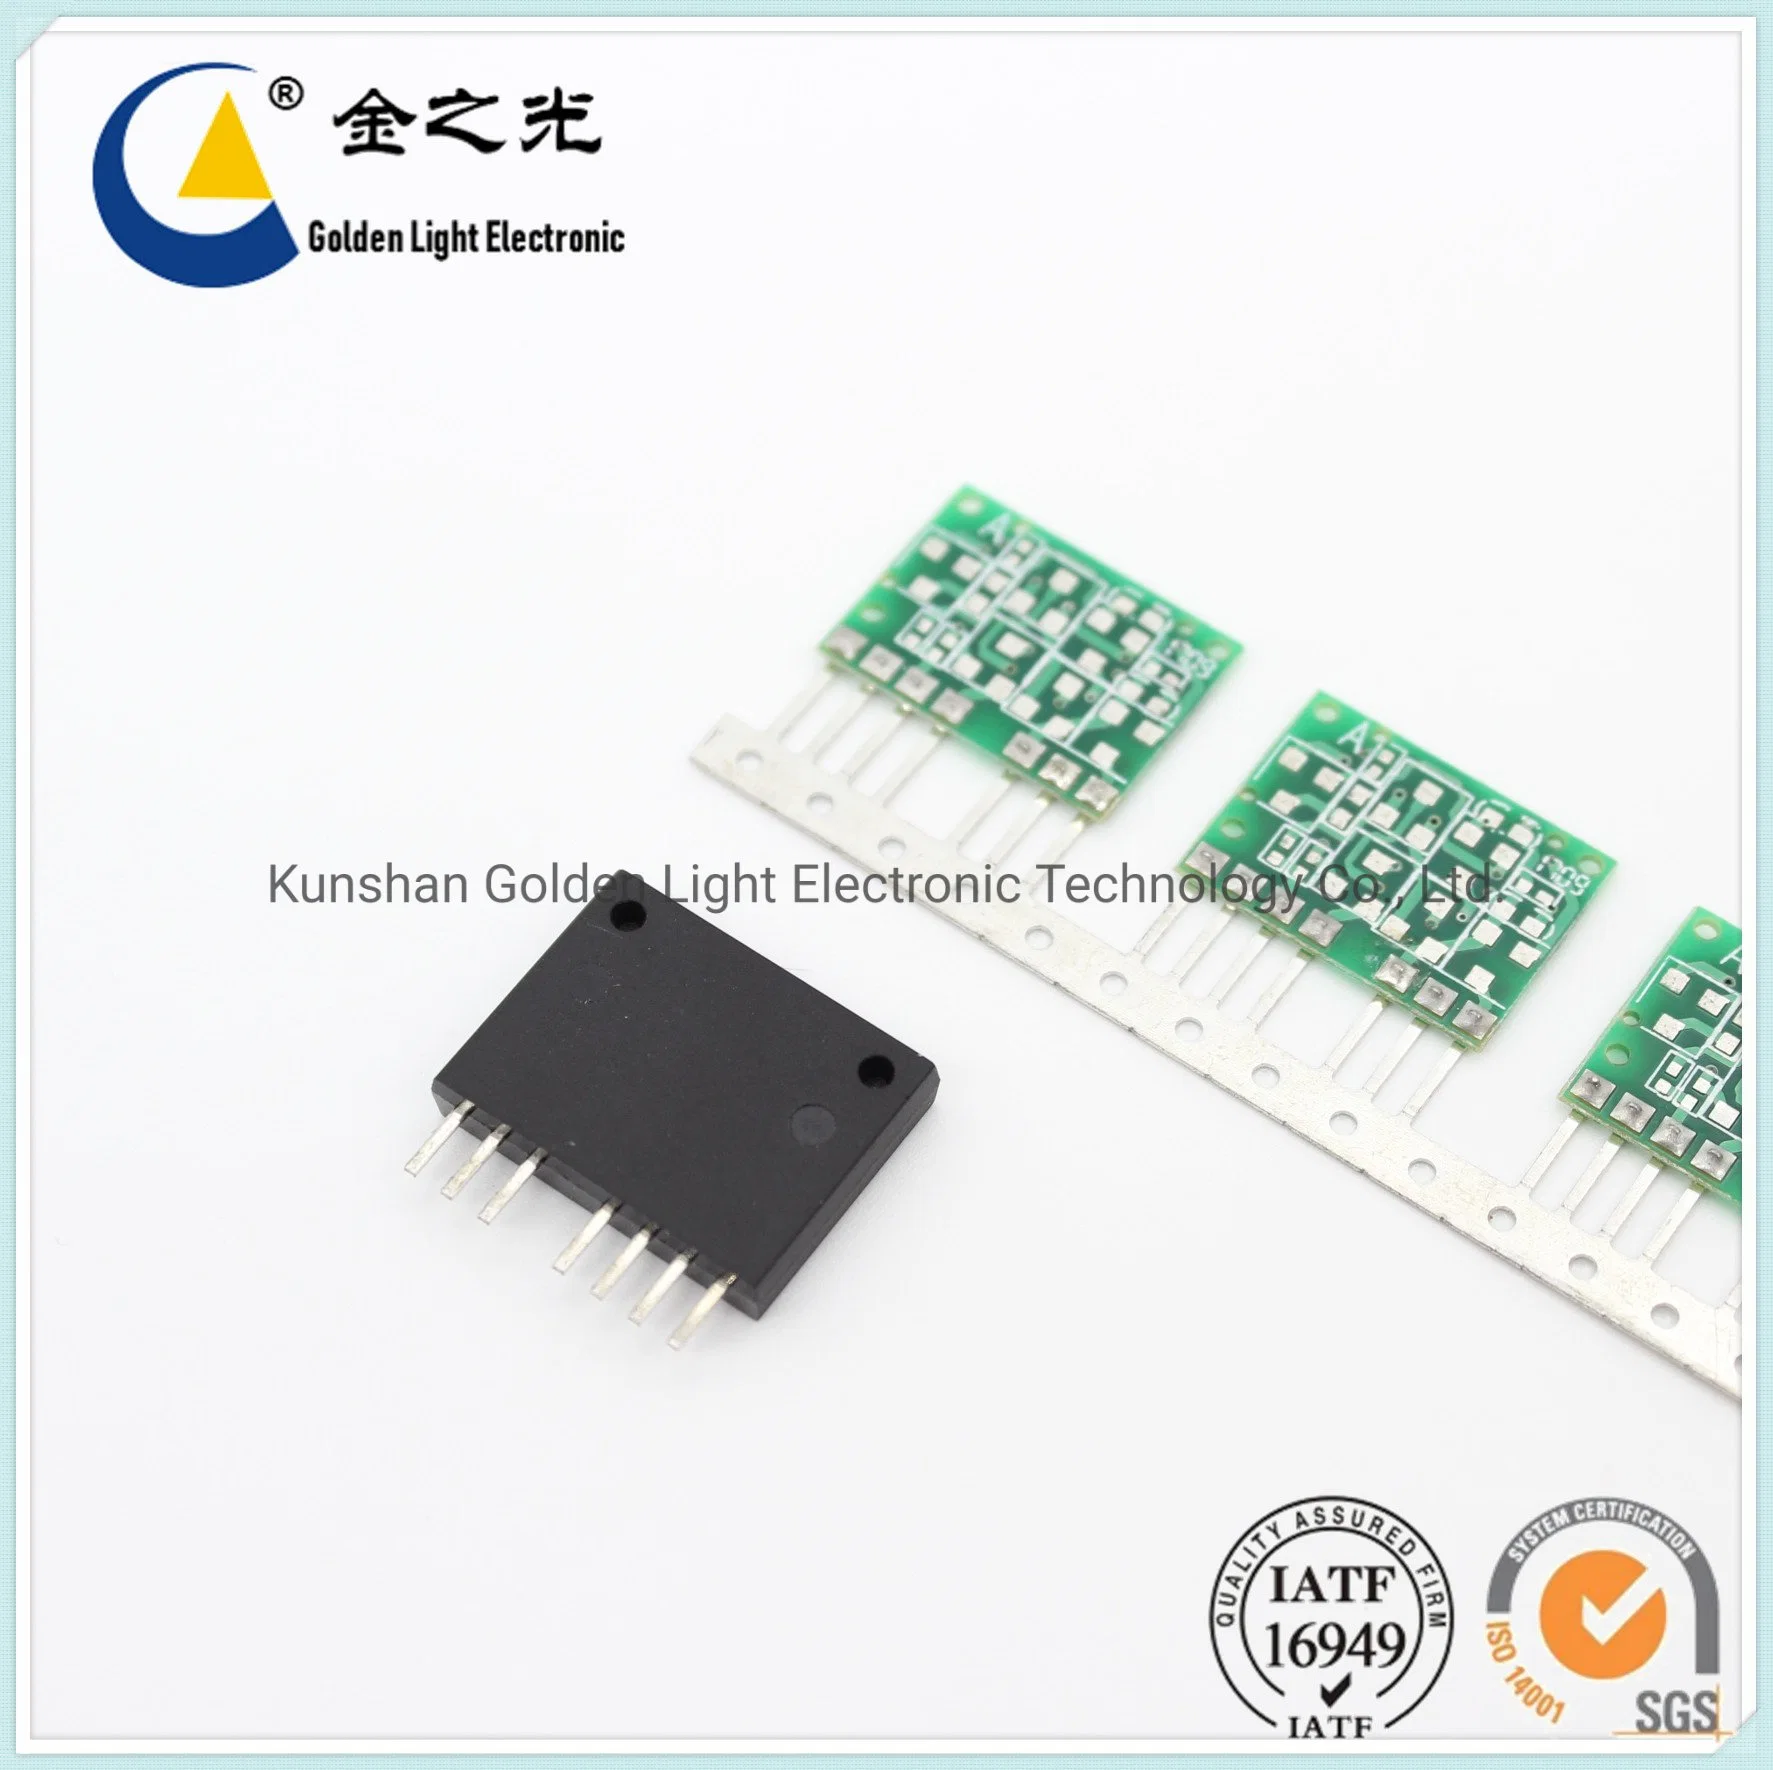 Customized High Quality Thermoset Epoxy Packaging for Automotive Electronics and Circuit Boards